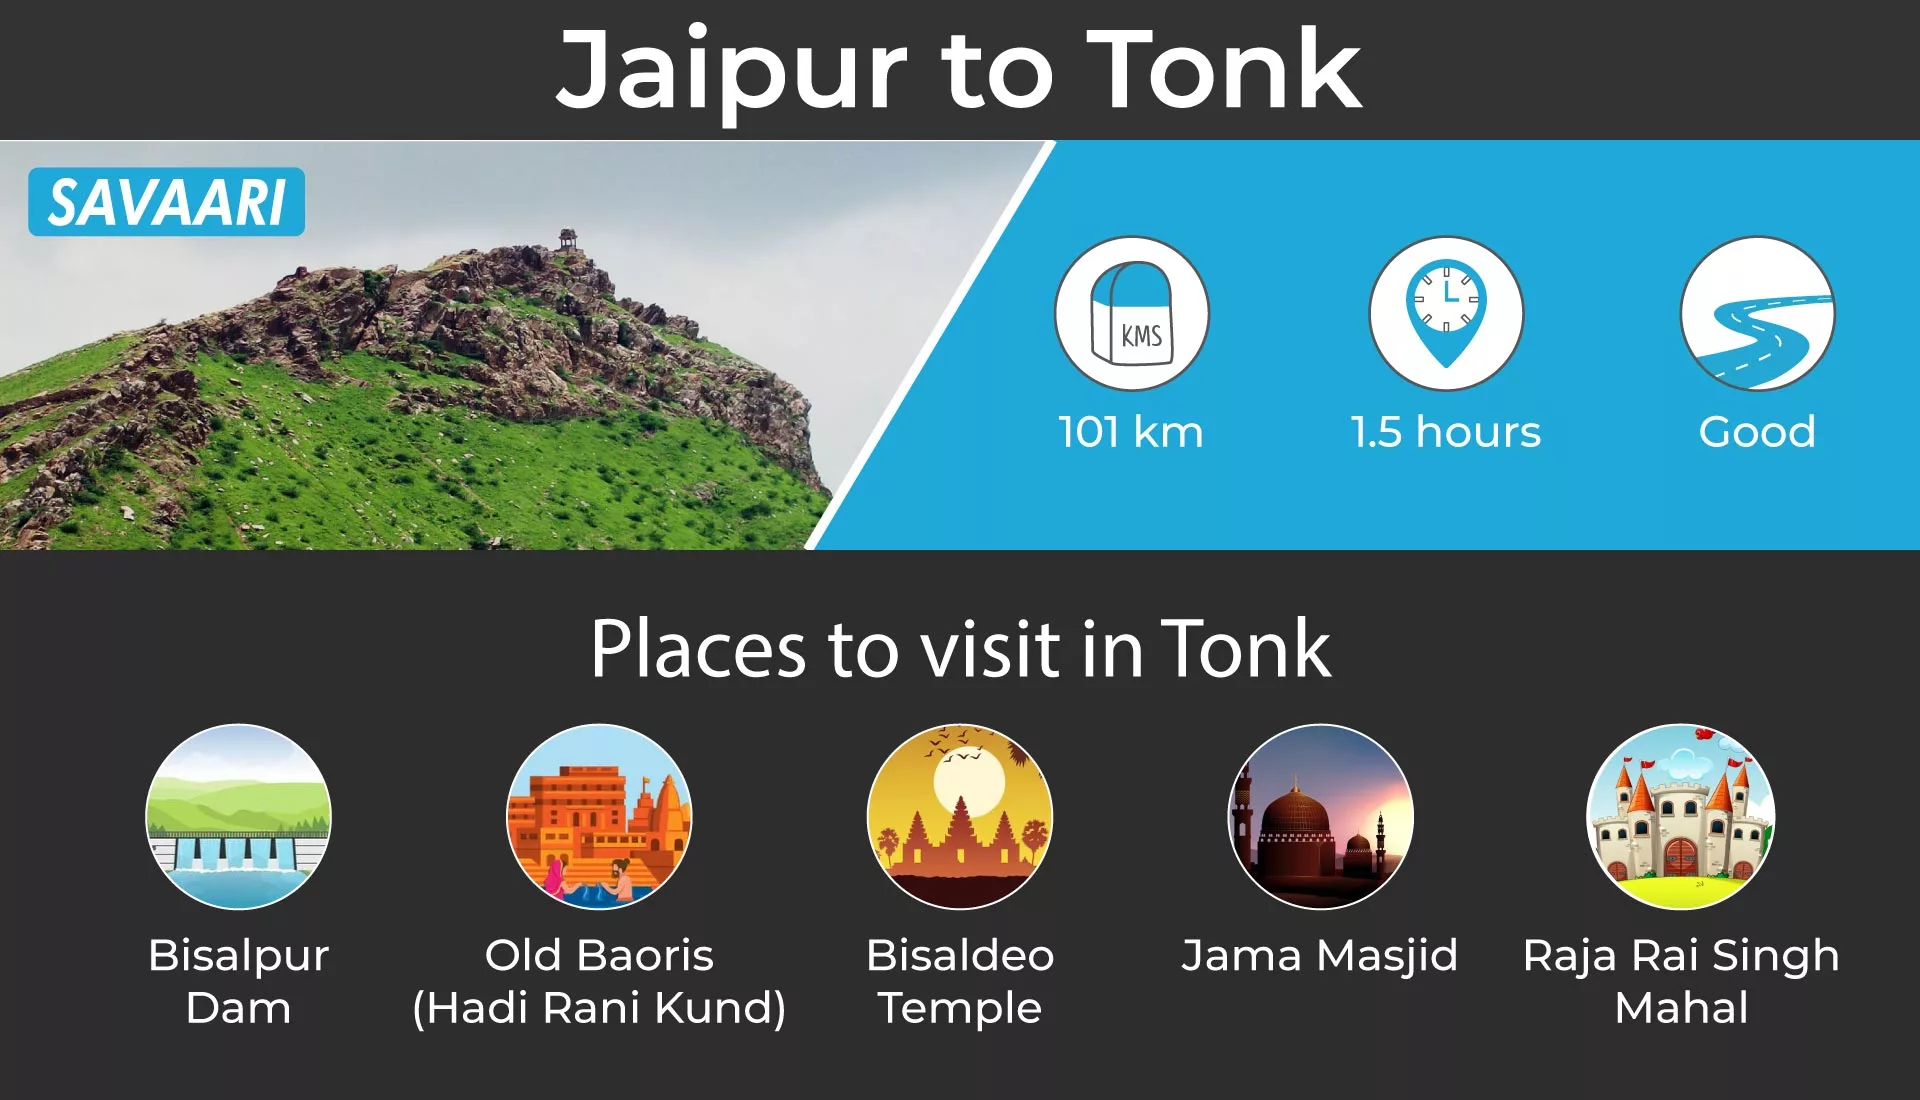 Jaipur to Tonk by road